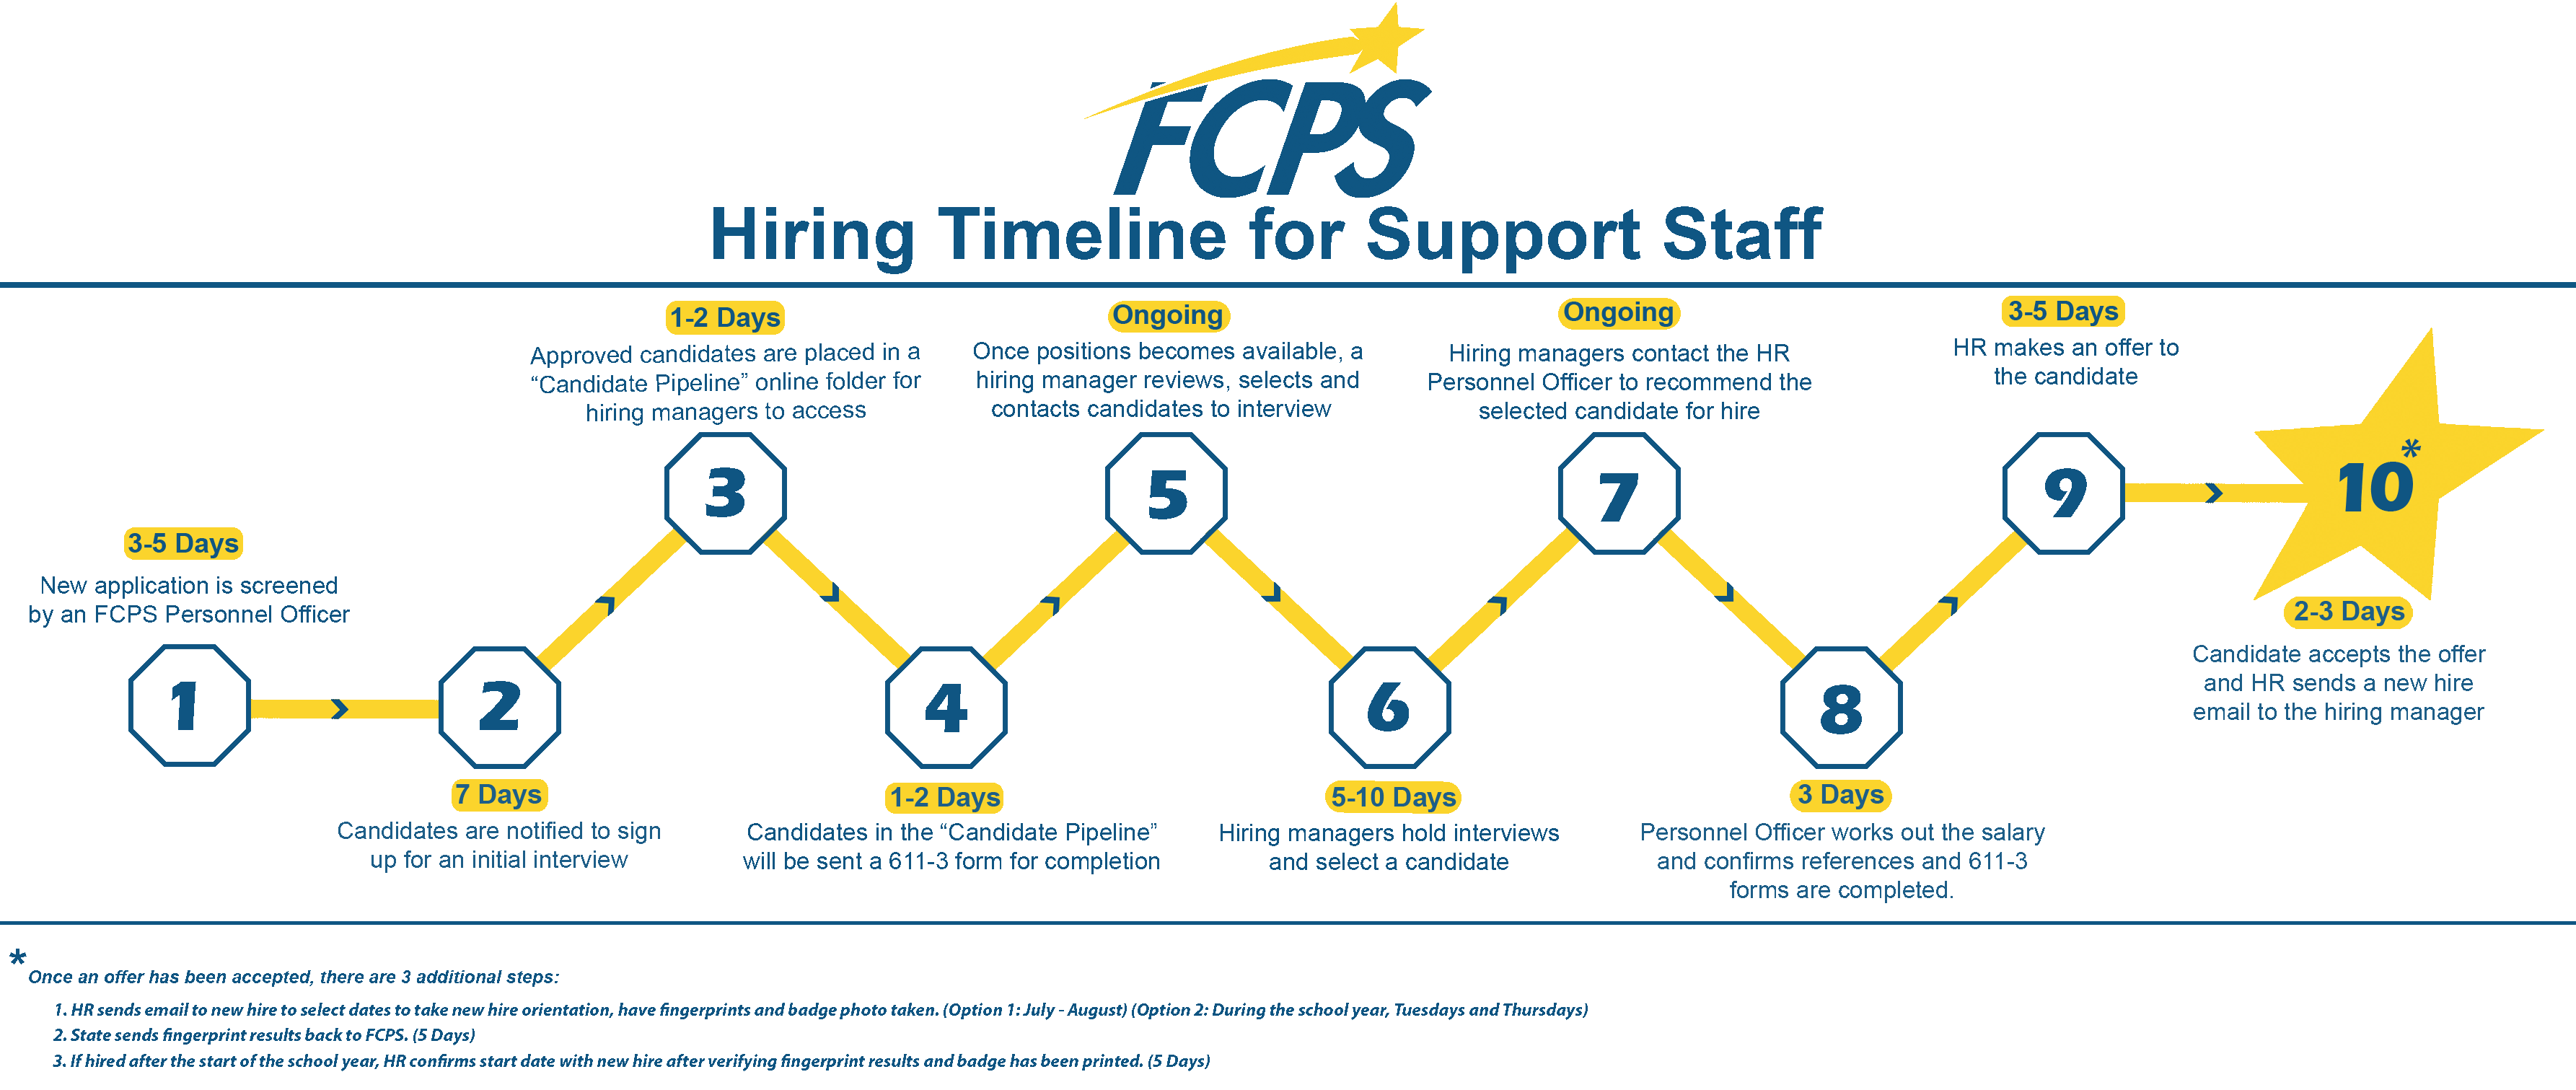 Hiring Timeline for Support Staff (see text below)